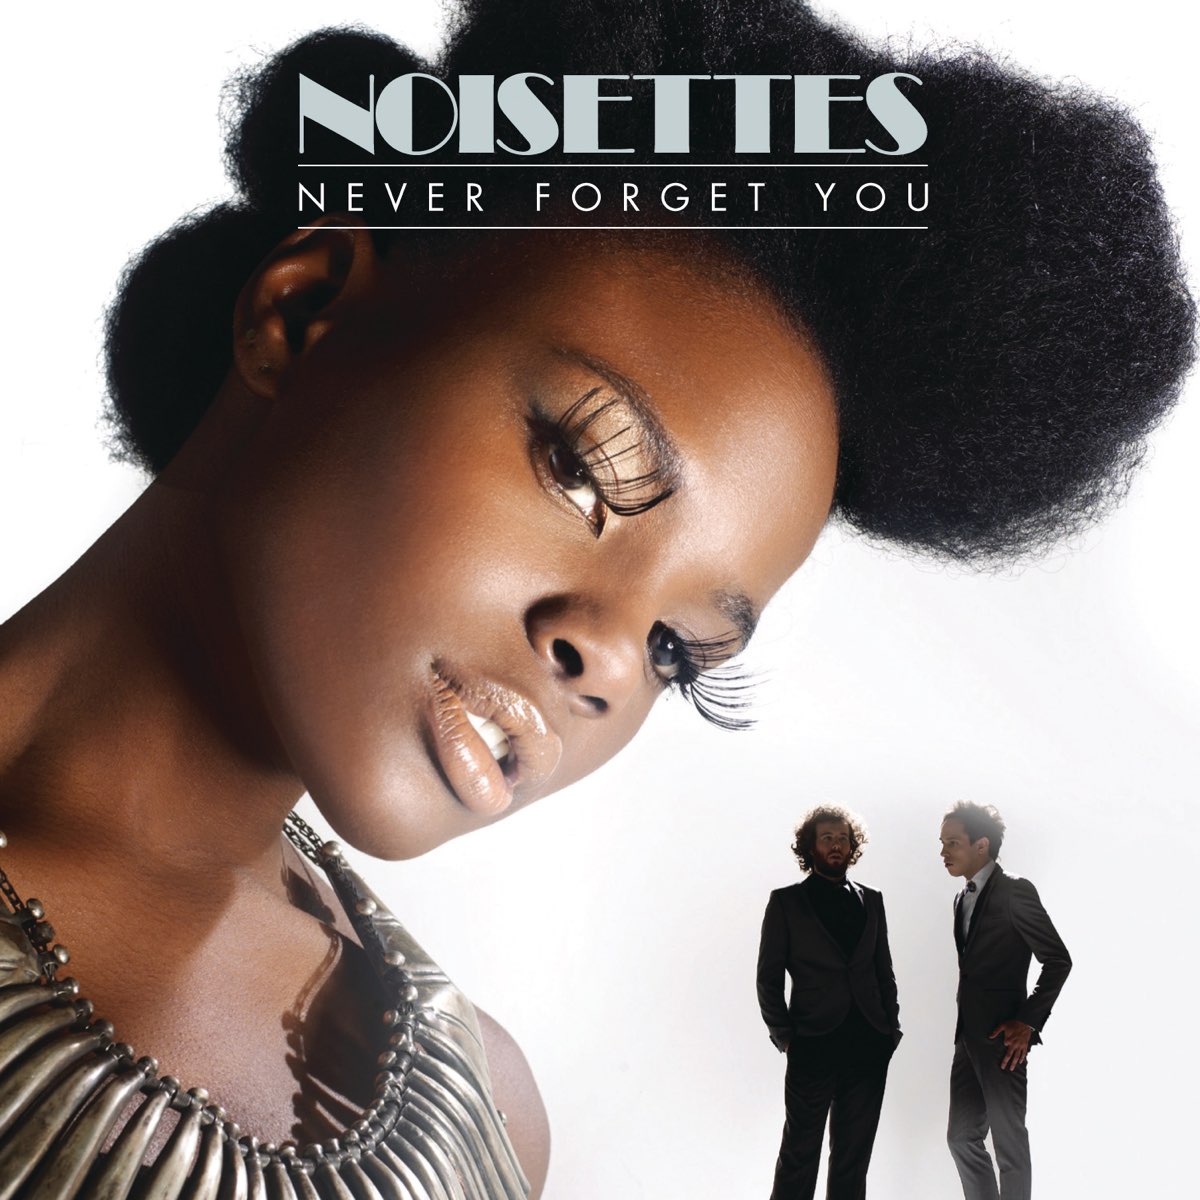 Never Forget You - EP by Noisettes on Apple Music